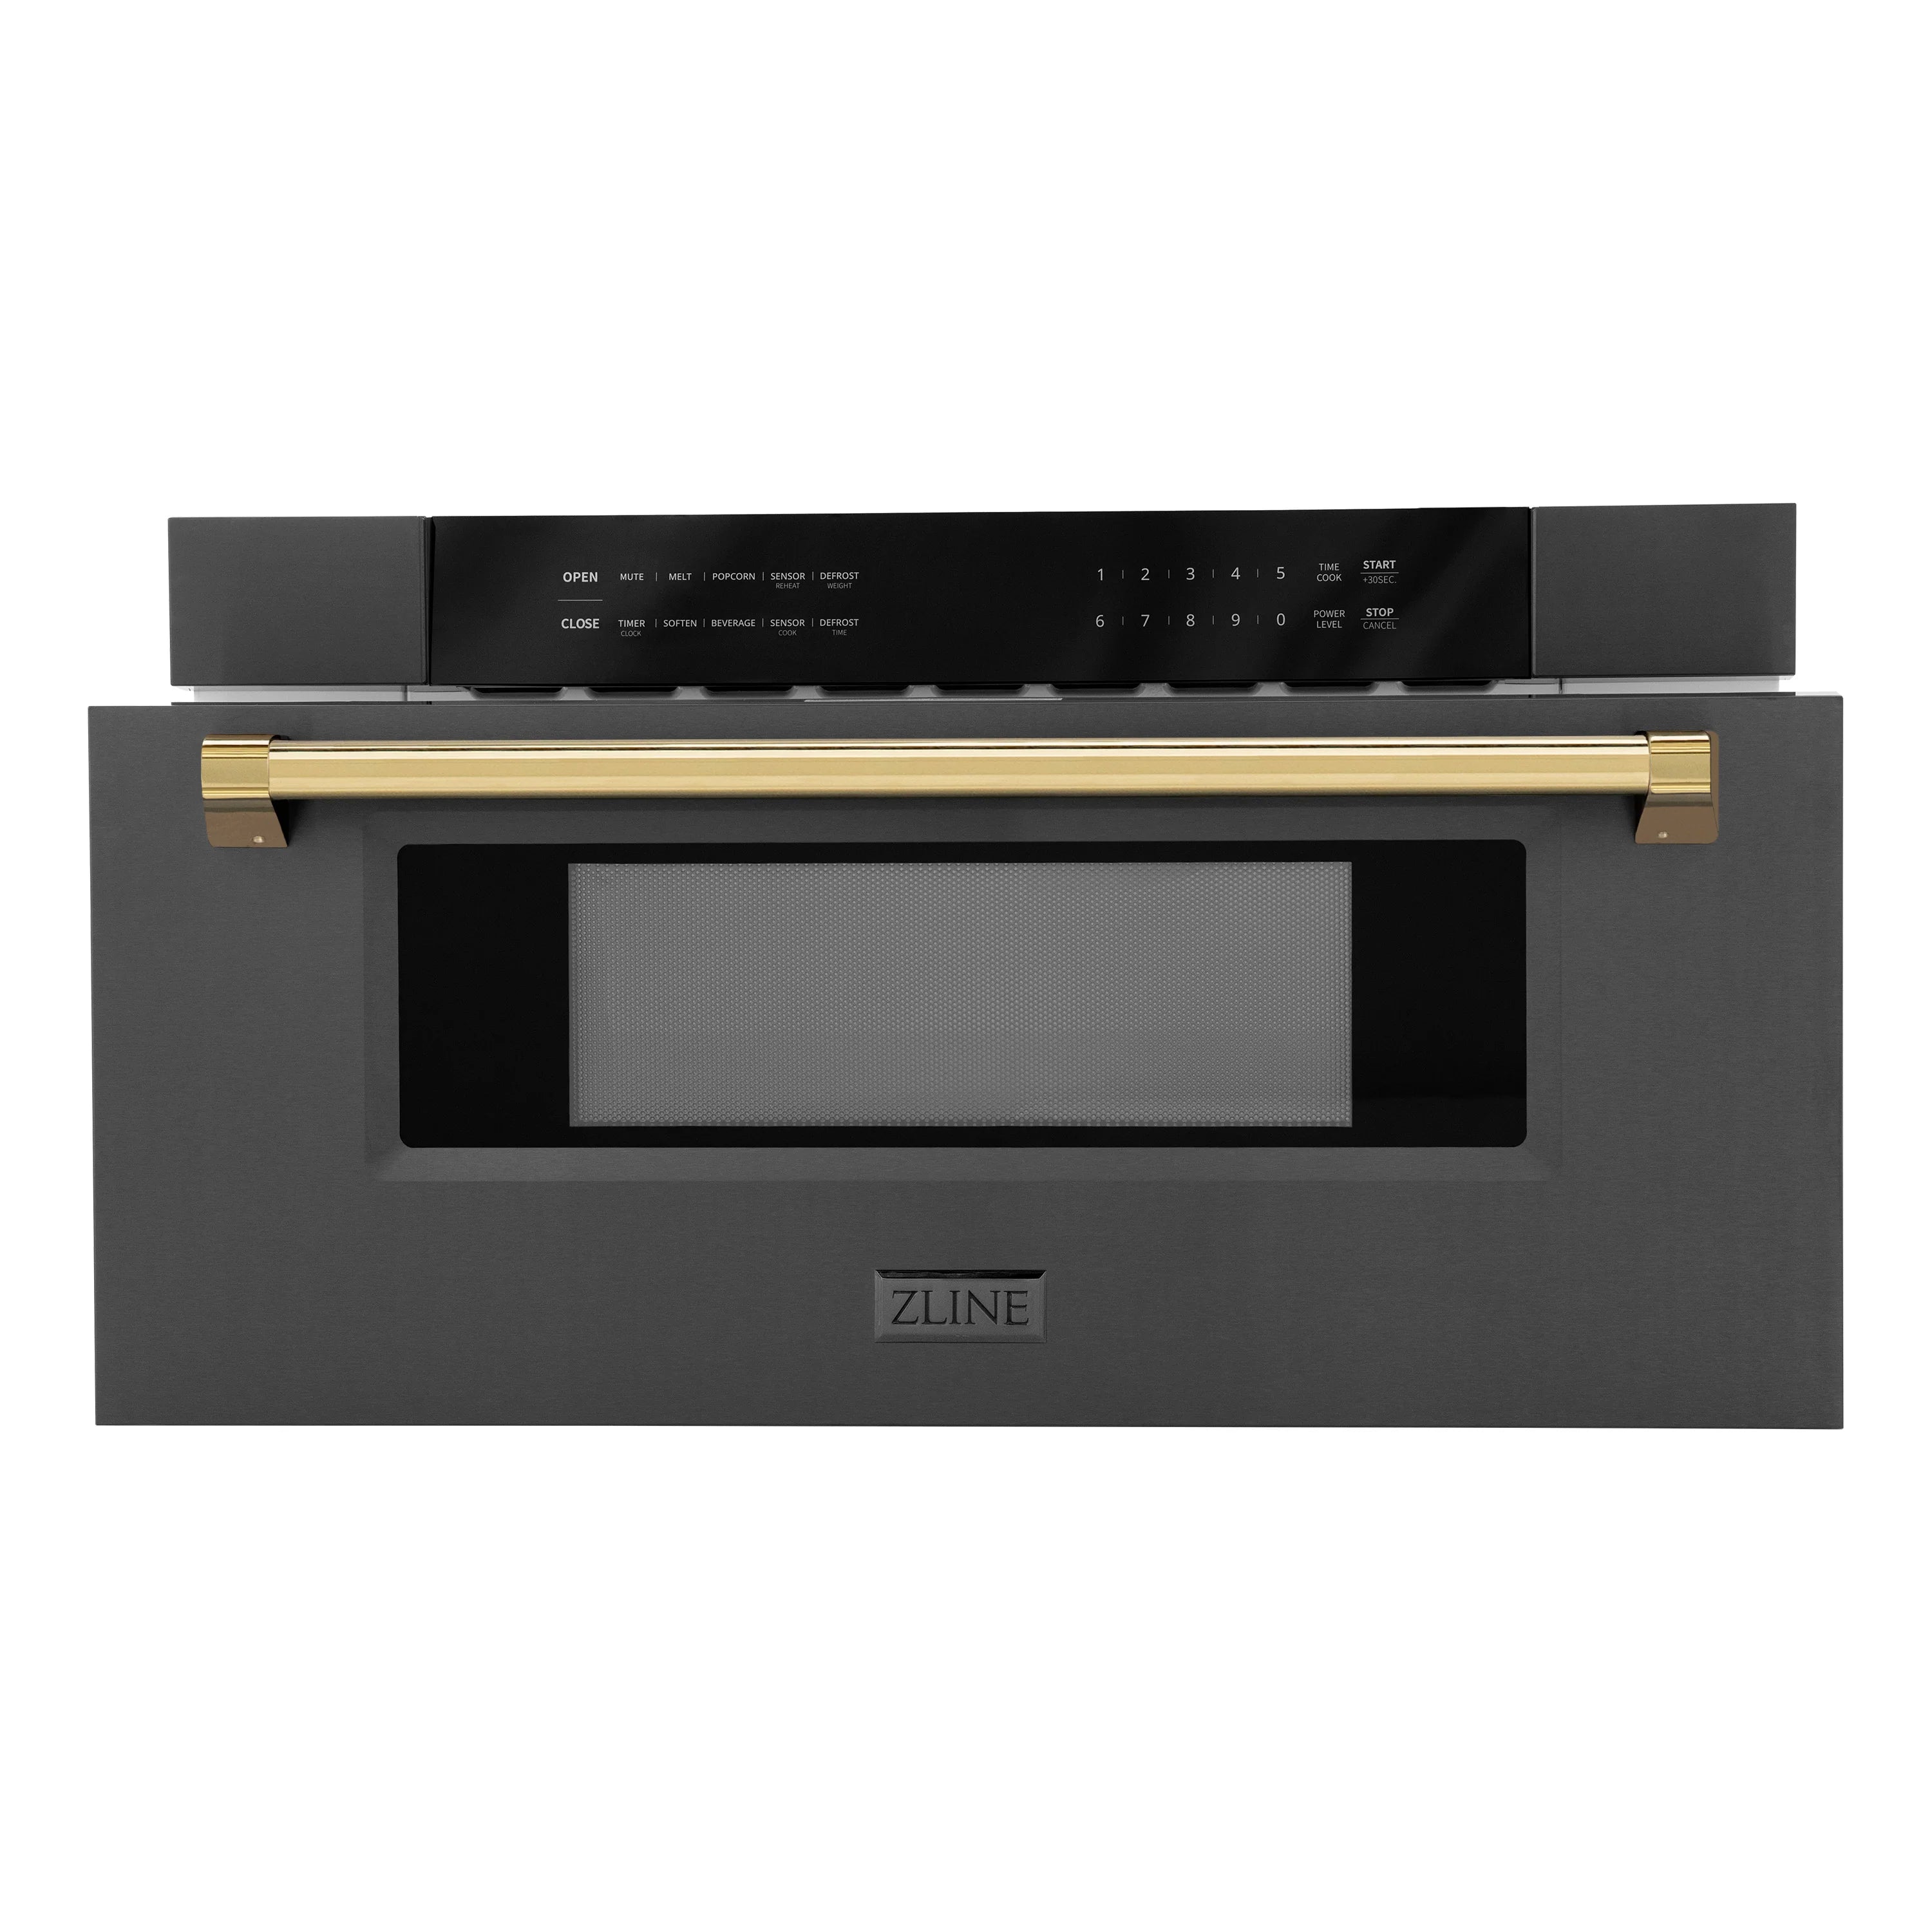 ZLINE Autograph Edition 30" 1.2 cu. ft. Built-in Microwave Drawer in Black Stainless Steel and Gold Accents (MWDZ-30-BS-G)